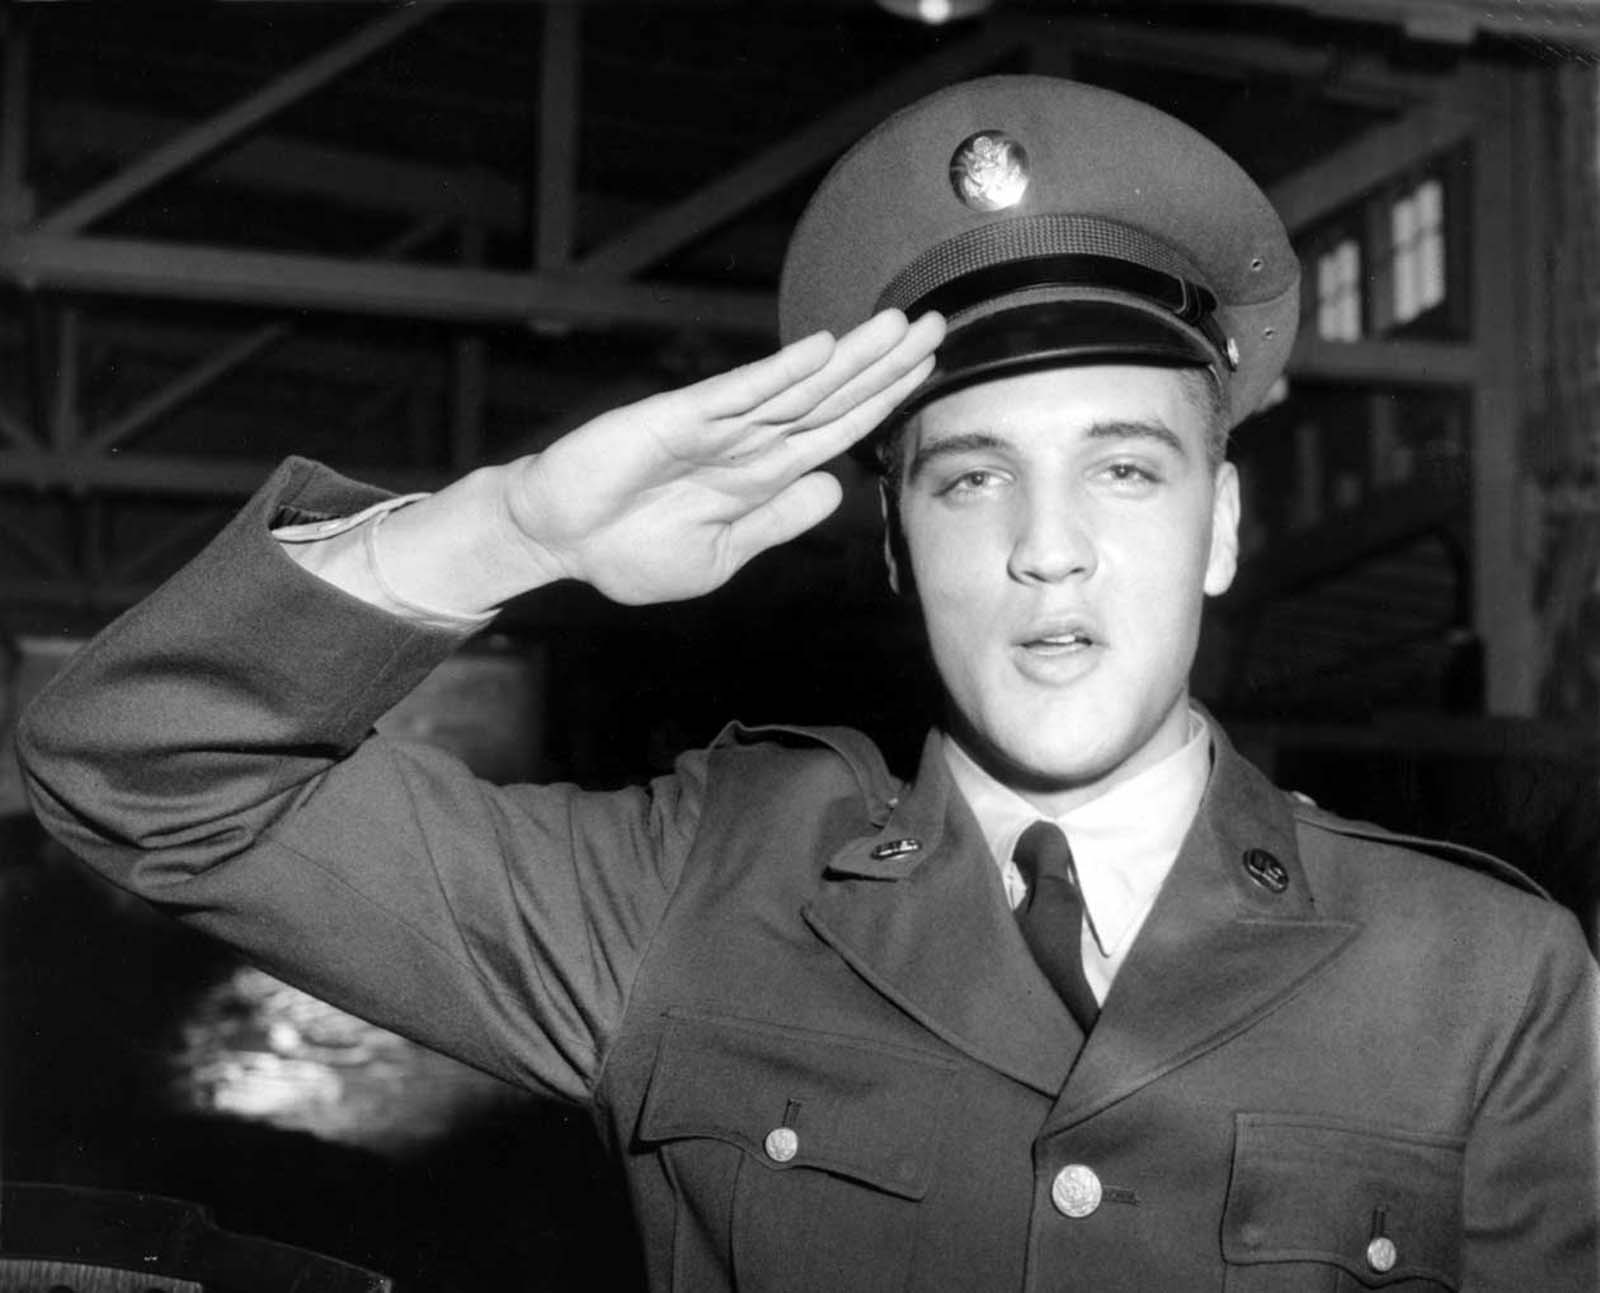 Presley salutes for a portrait during his tour of duty in Germany in February of 1959.